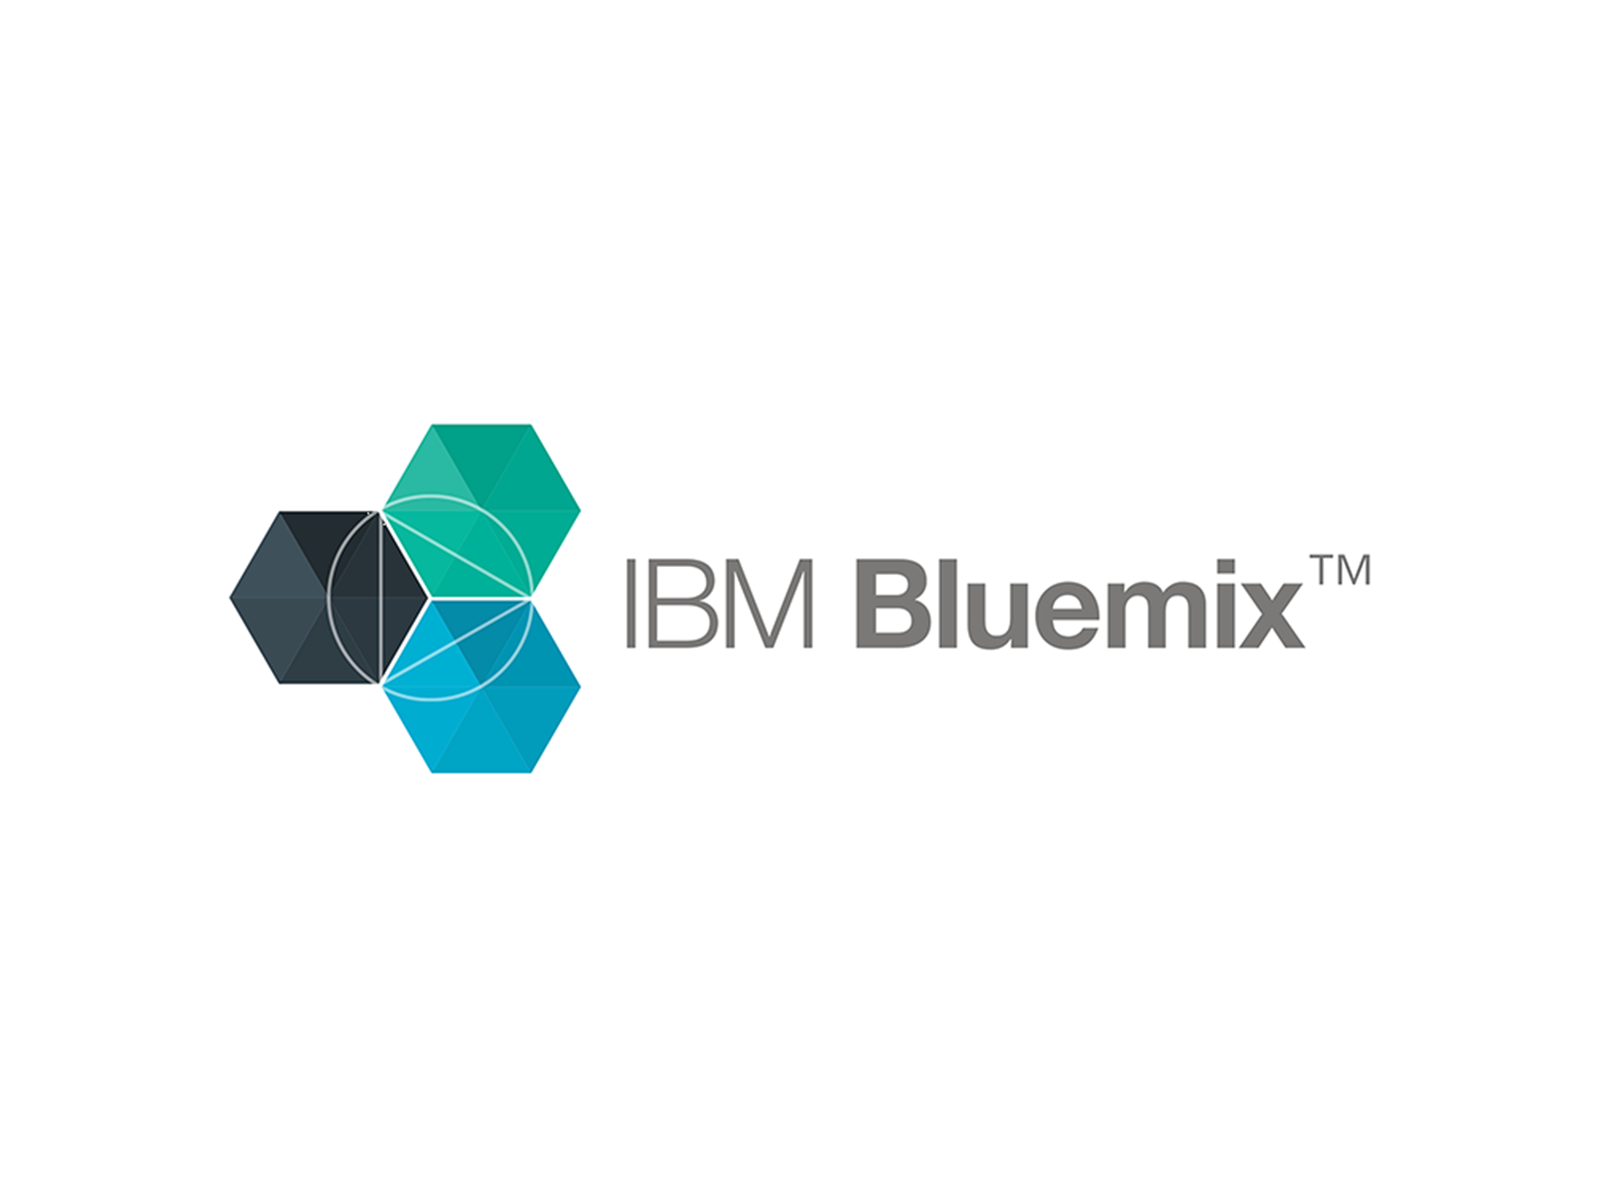 Communication & Collaboration as a Service by IBM Bluemix - Business Applications